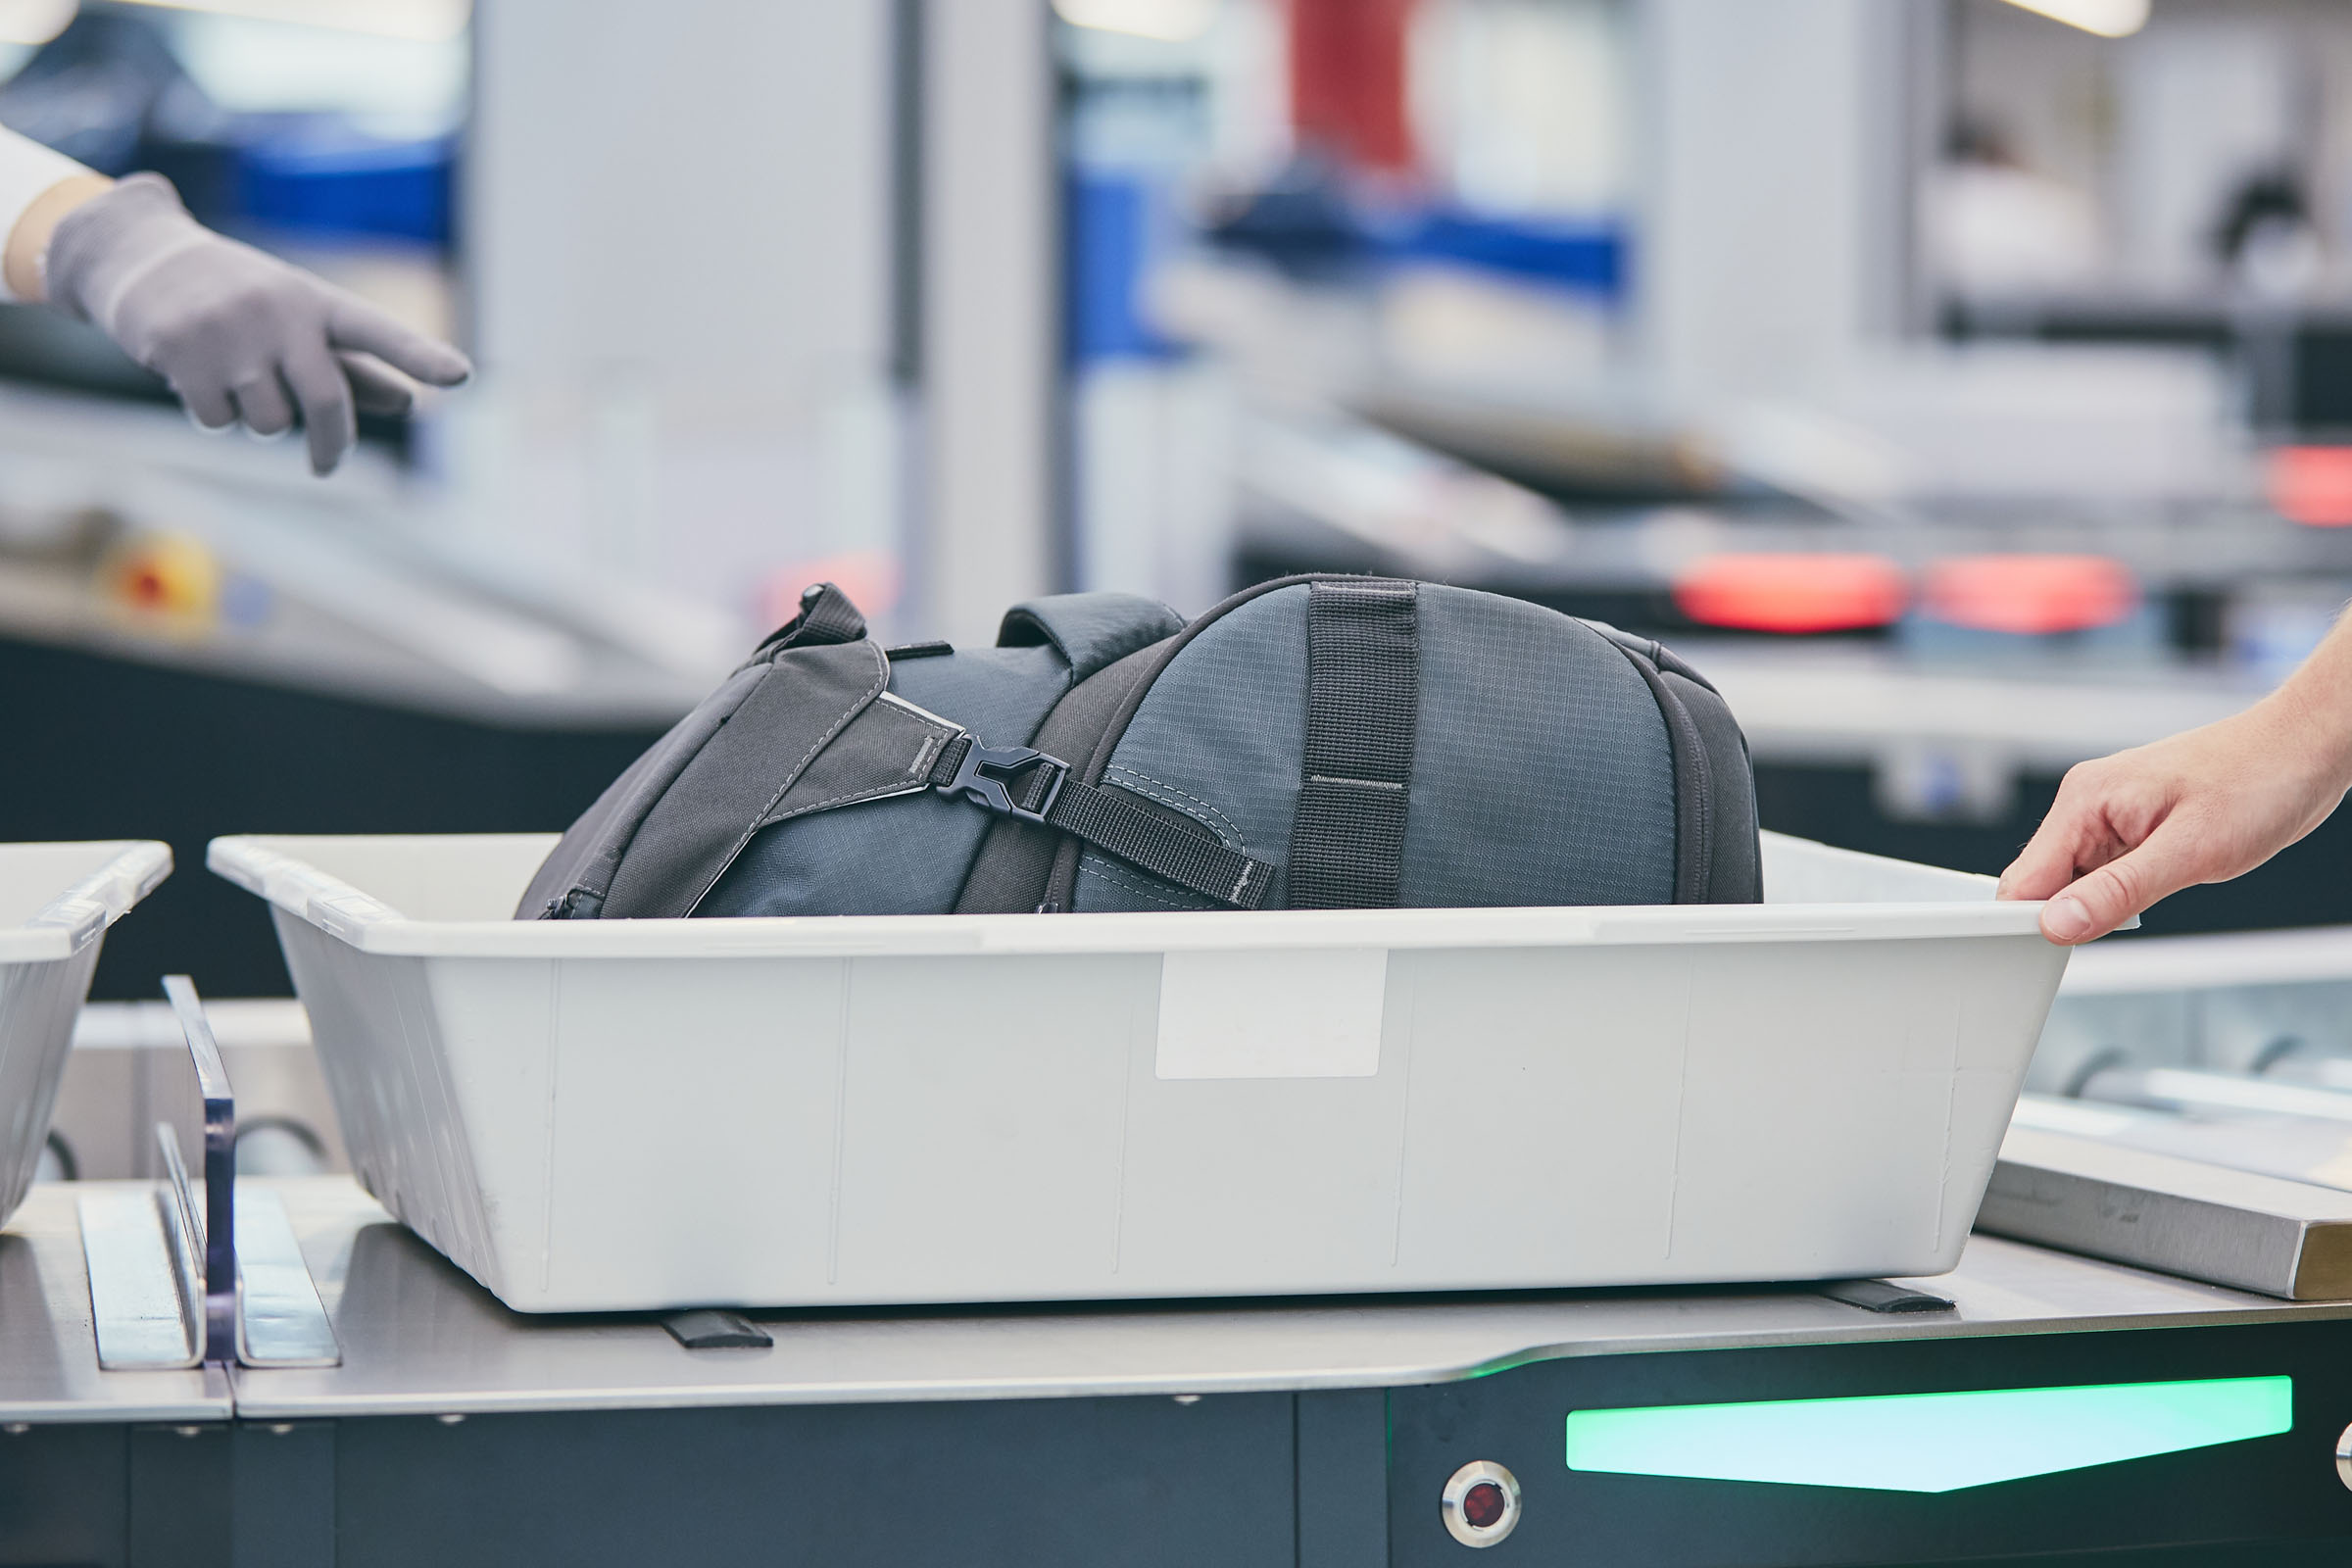 A gloved hand points to a bag in a plastic bin that another hand is pulling toward a scanner.